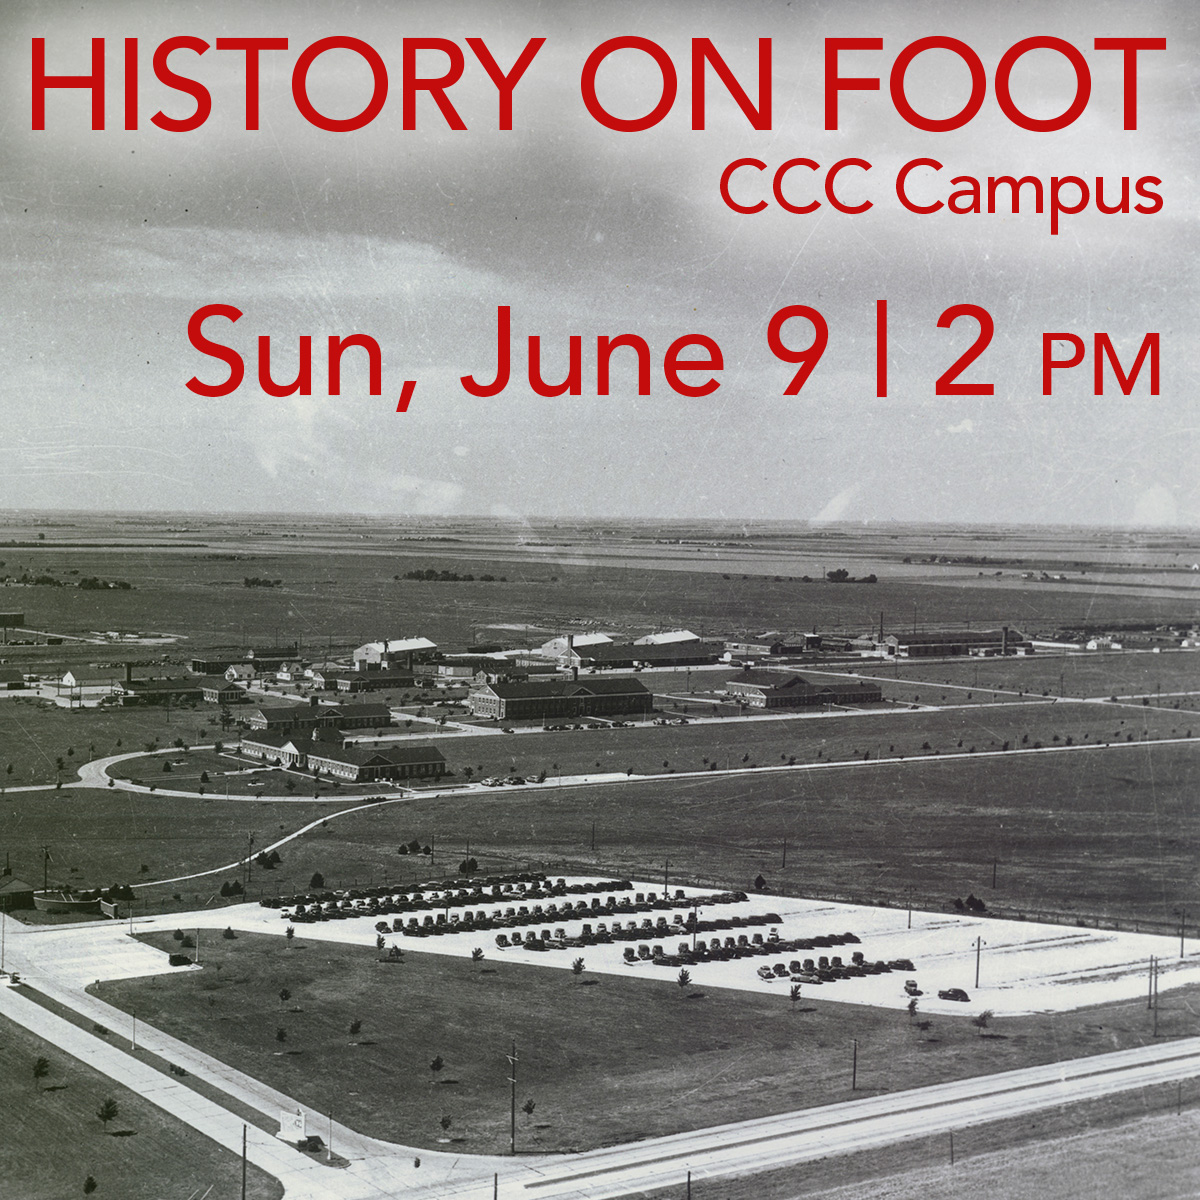 History on Foot Central community College